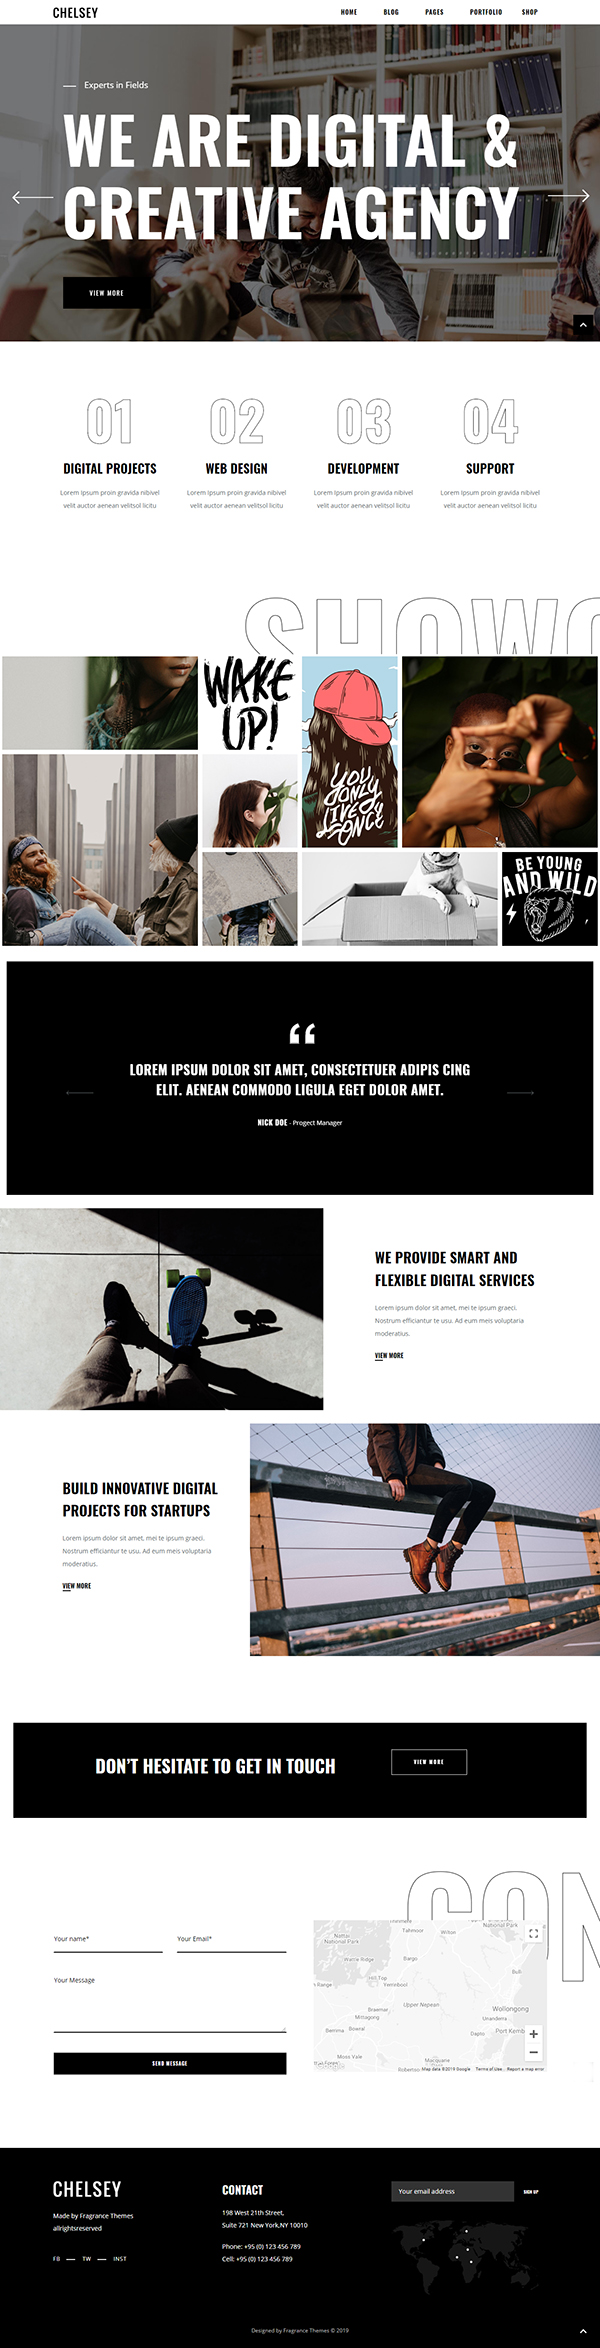 Chelsey - A Creative Multipurpose Theme for Freelancers and Agencies